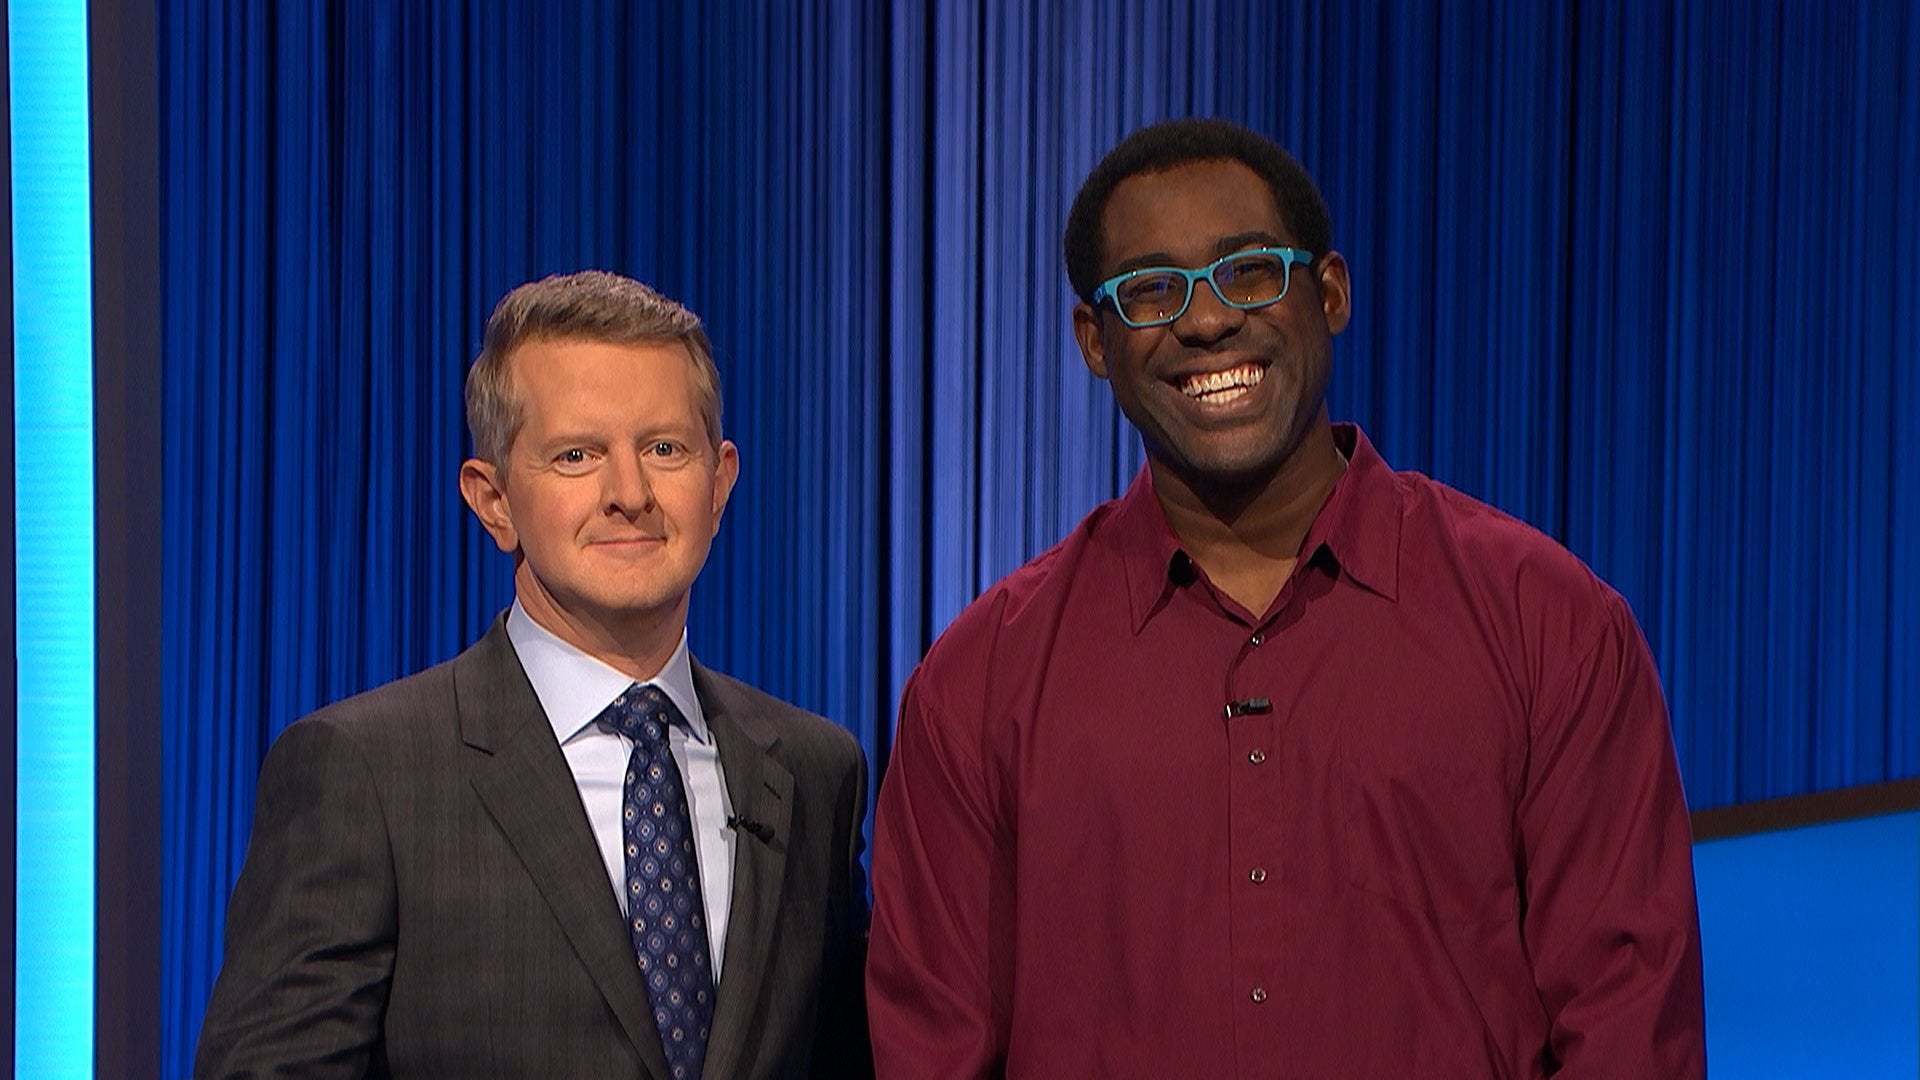 What Is Black Excellence? Former “Jeopardy!” Contestants Reflect On Competing While Black